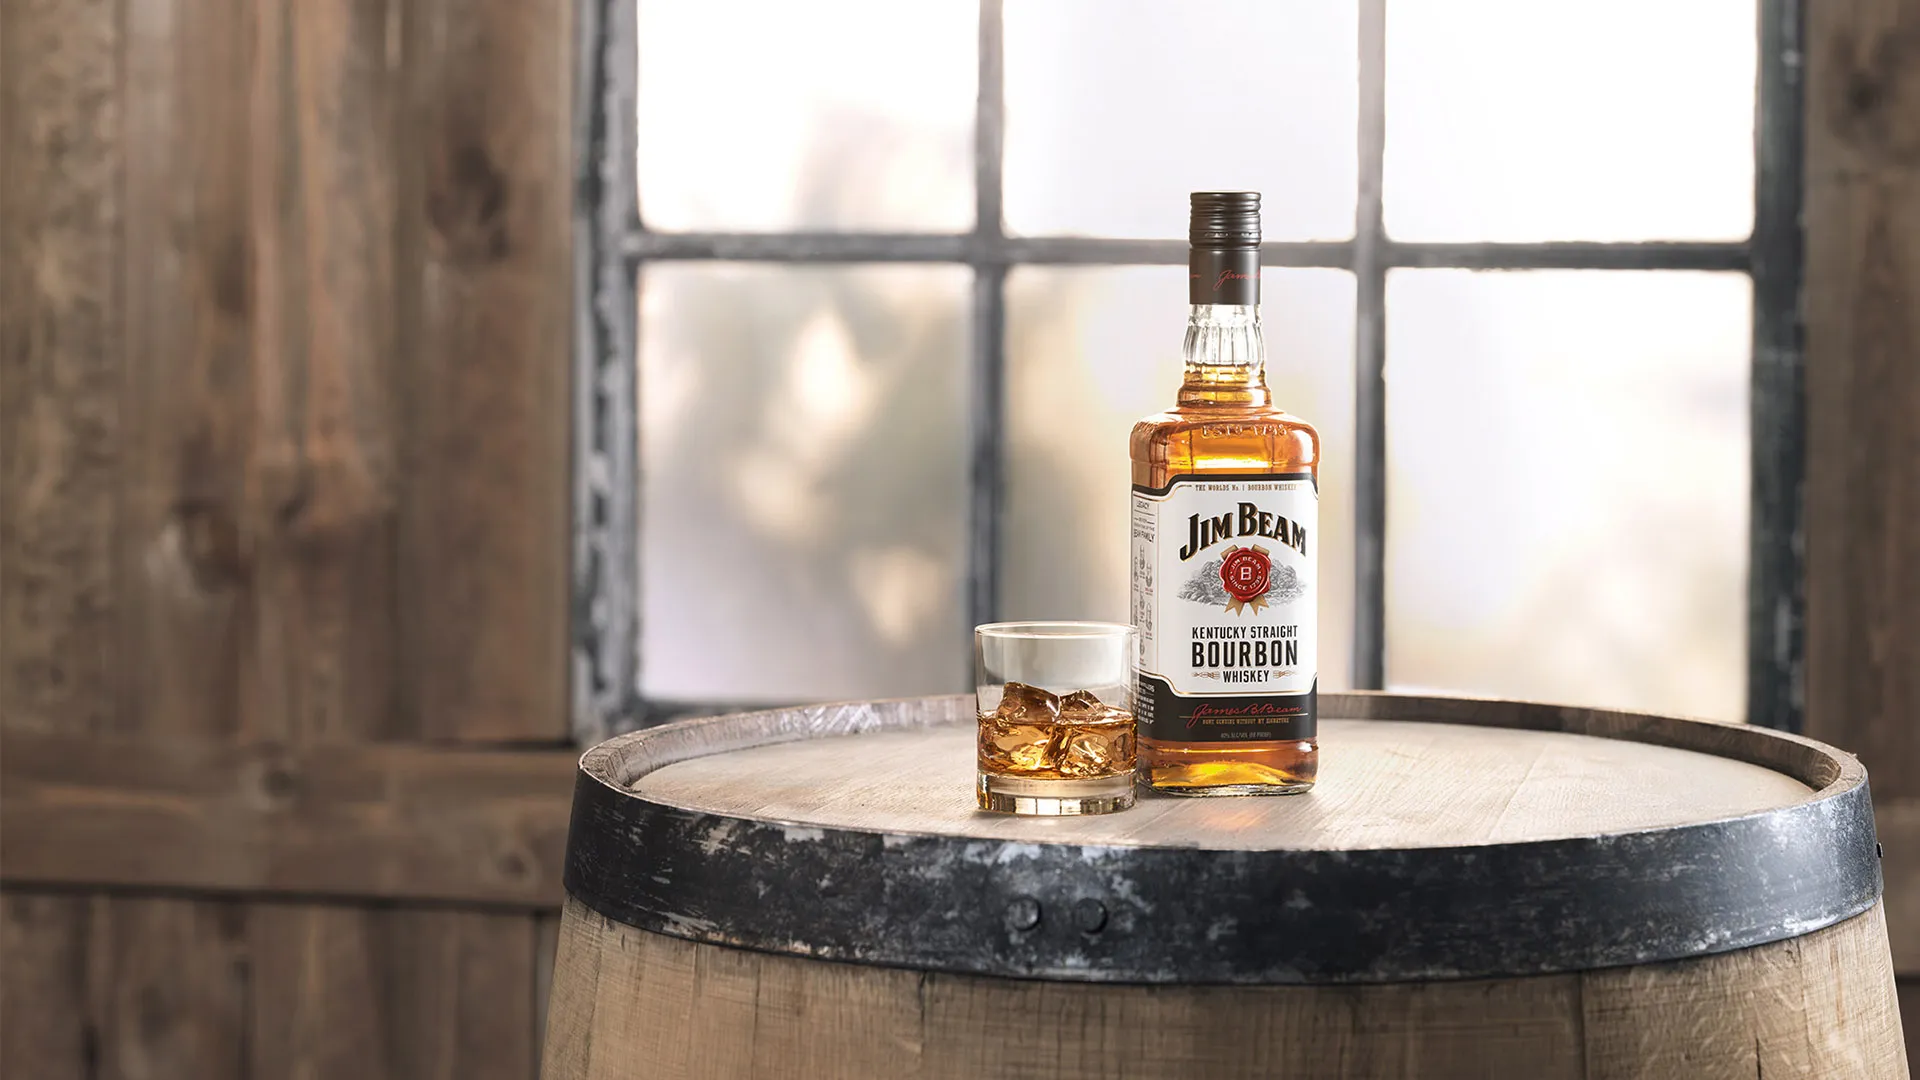 beam suntory delivers strong 2022 results driven by premiumization strategy and ready to drink growth